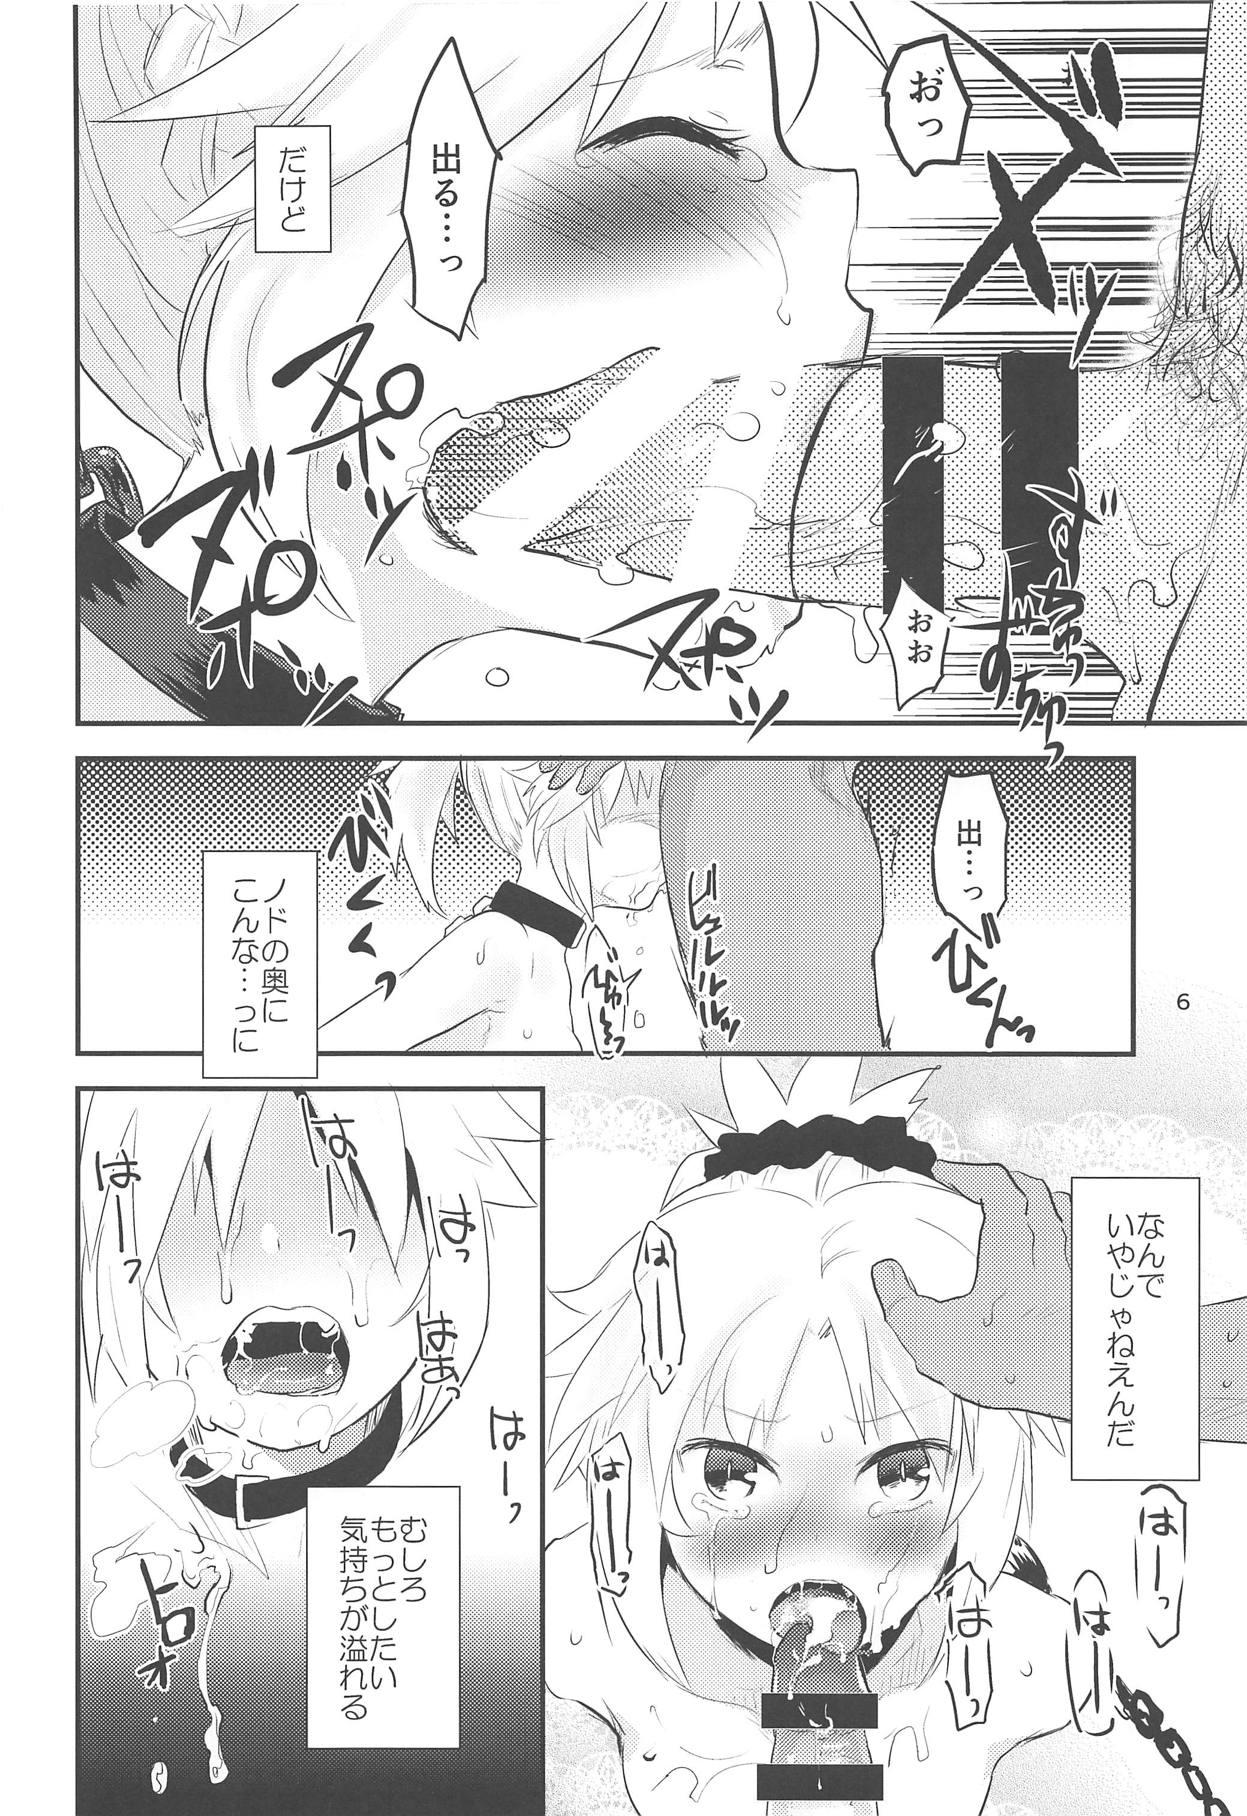 Atm Erotic to Knight - Fate grand order Big Pussy - Page 5